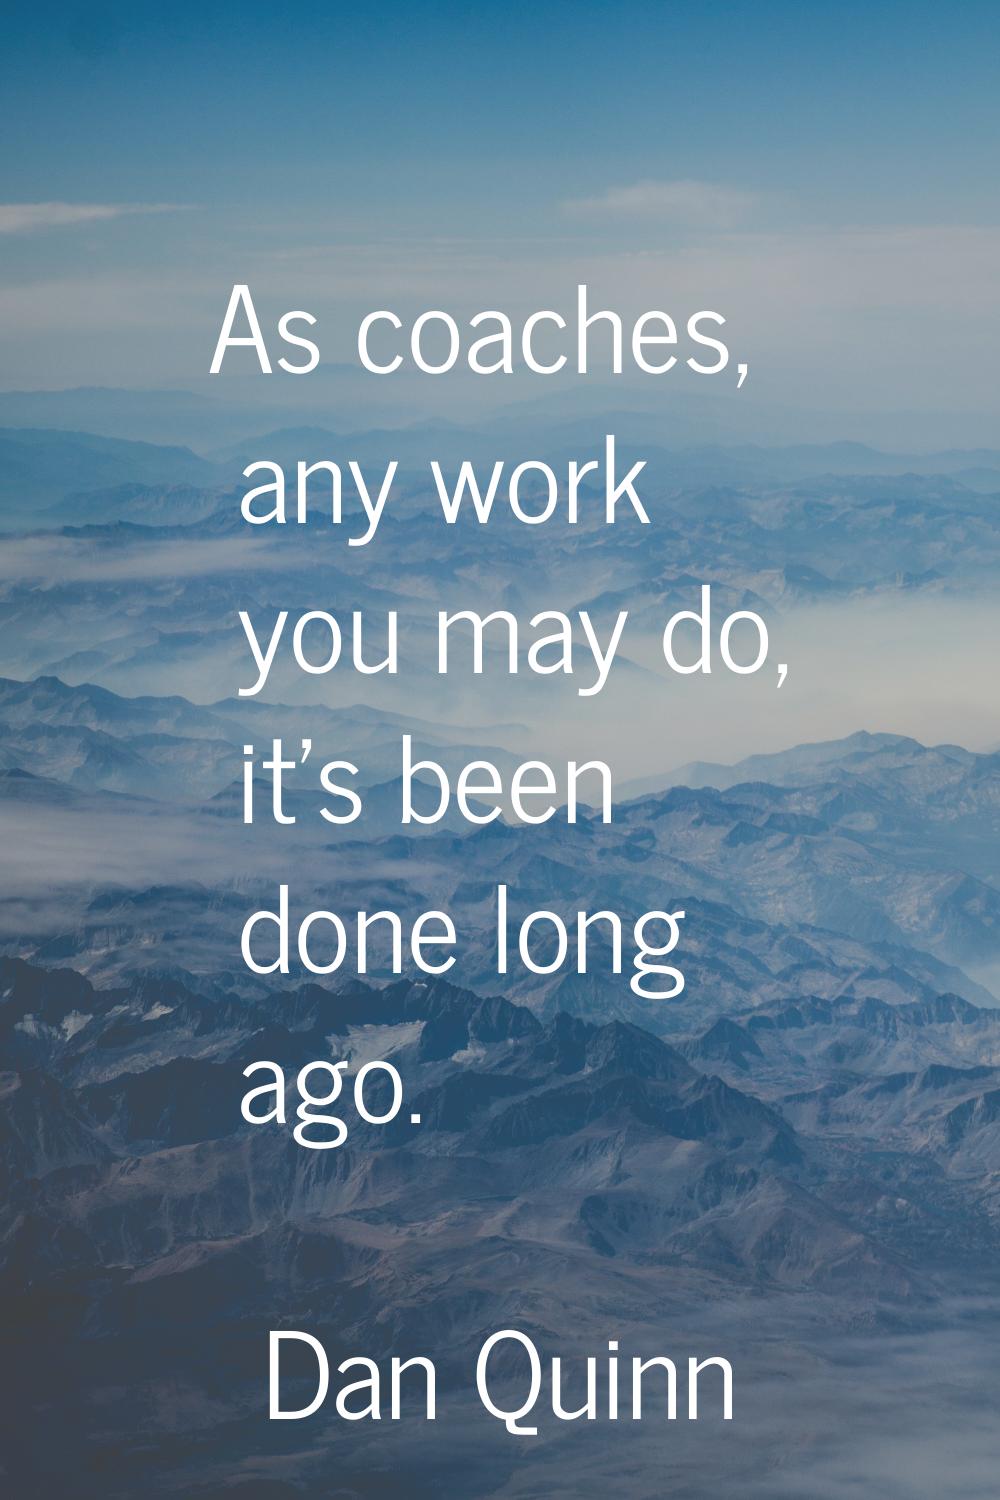 As coaches, any work you may do, it's been done long ago.